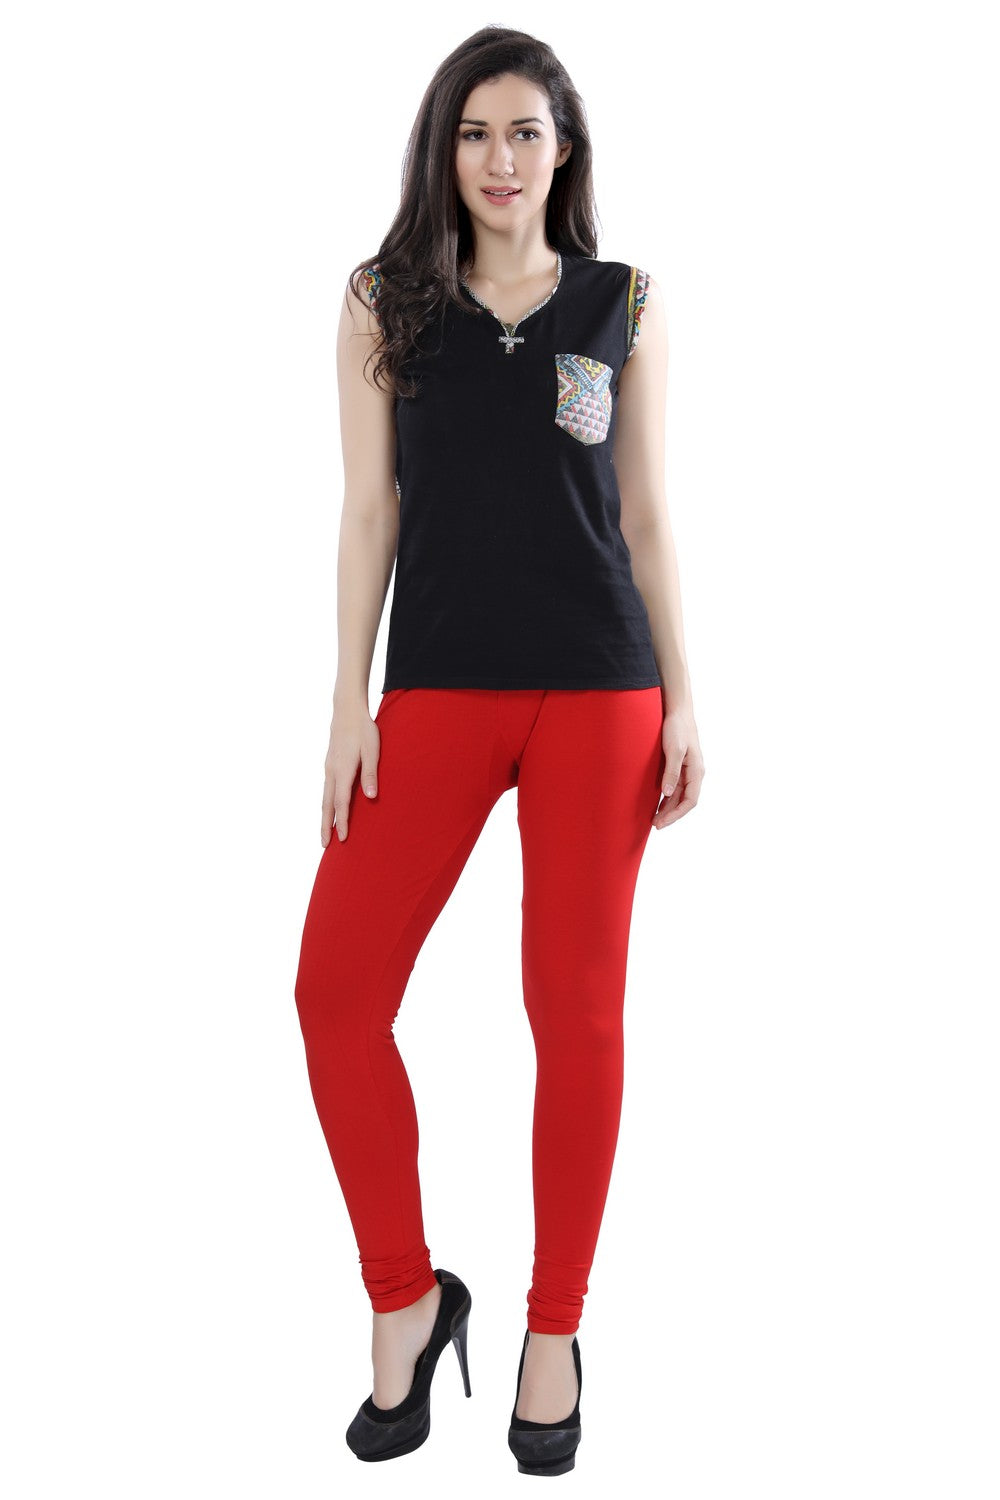 Details more than 132 red colour leggings best